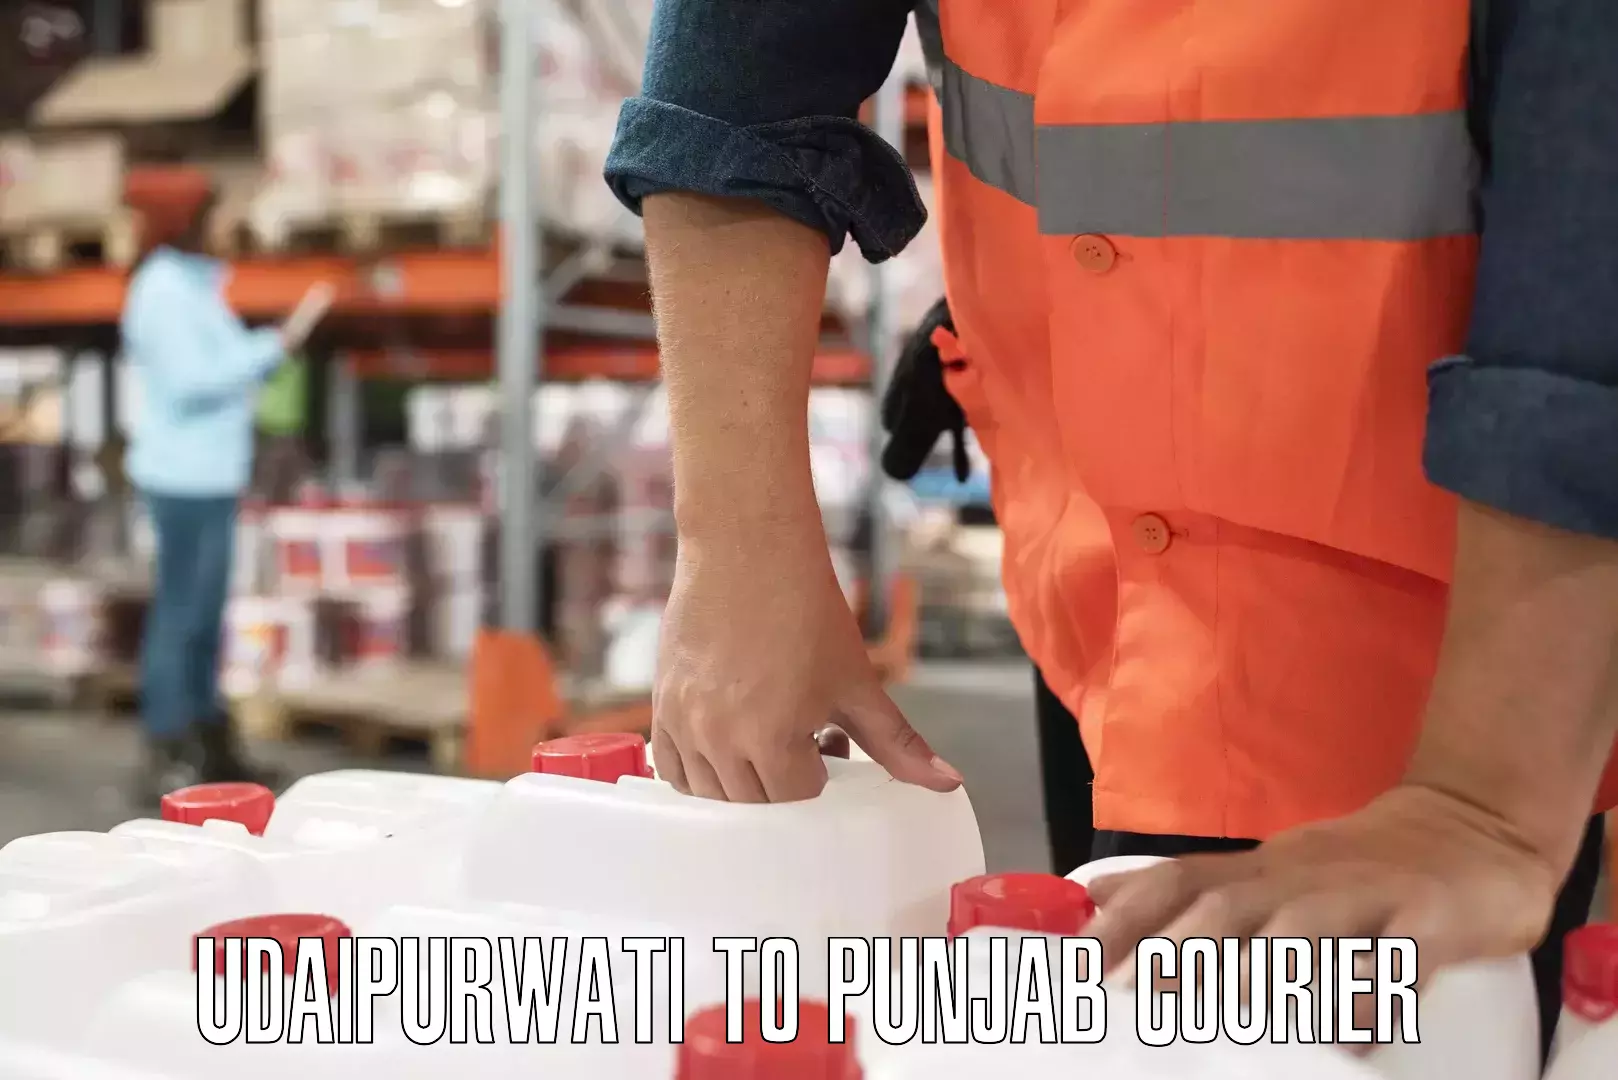 Courier service partnerships Udaipurwati to Mohali